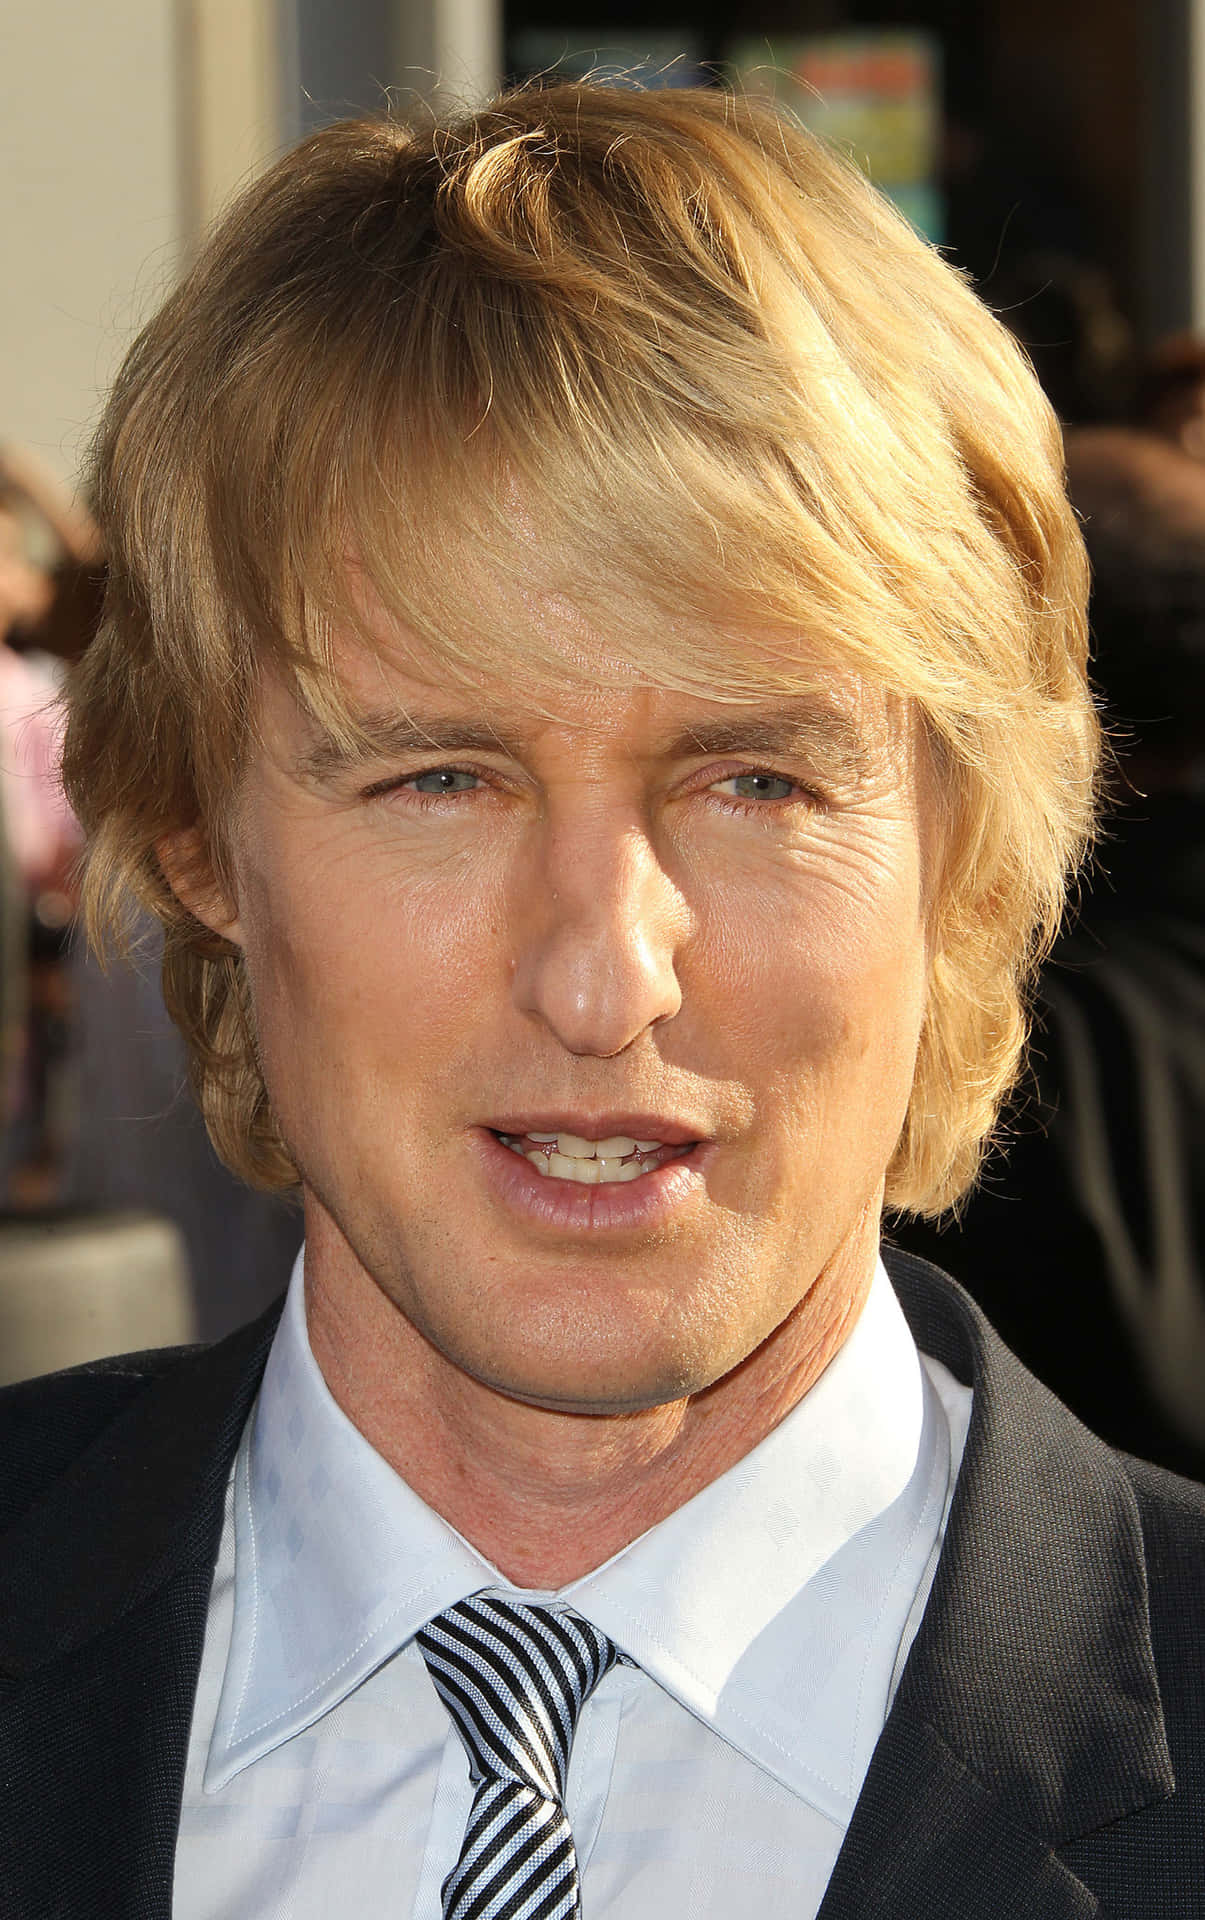 Owen Wilson poses with a relaxed smile Wallpaper